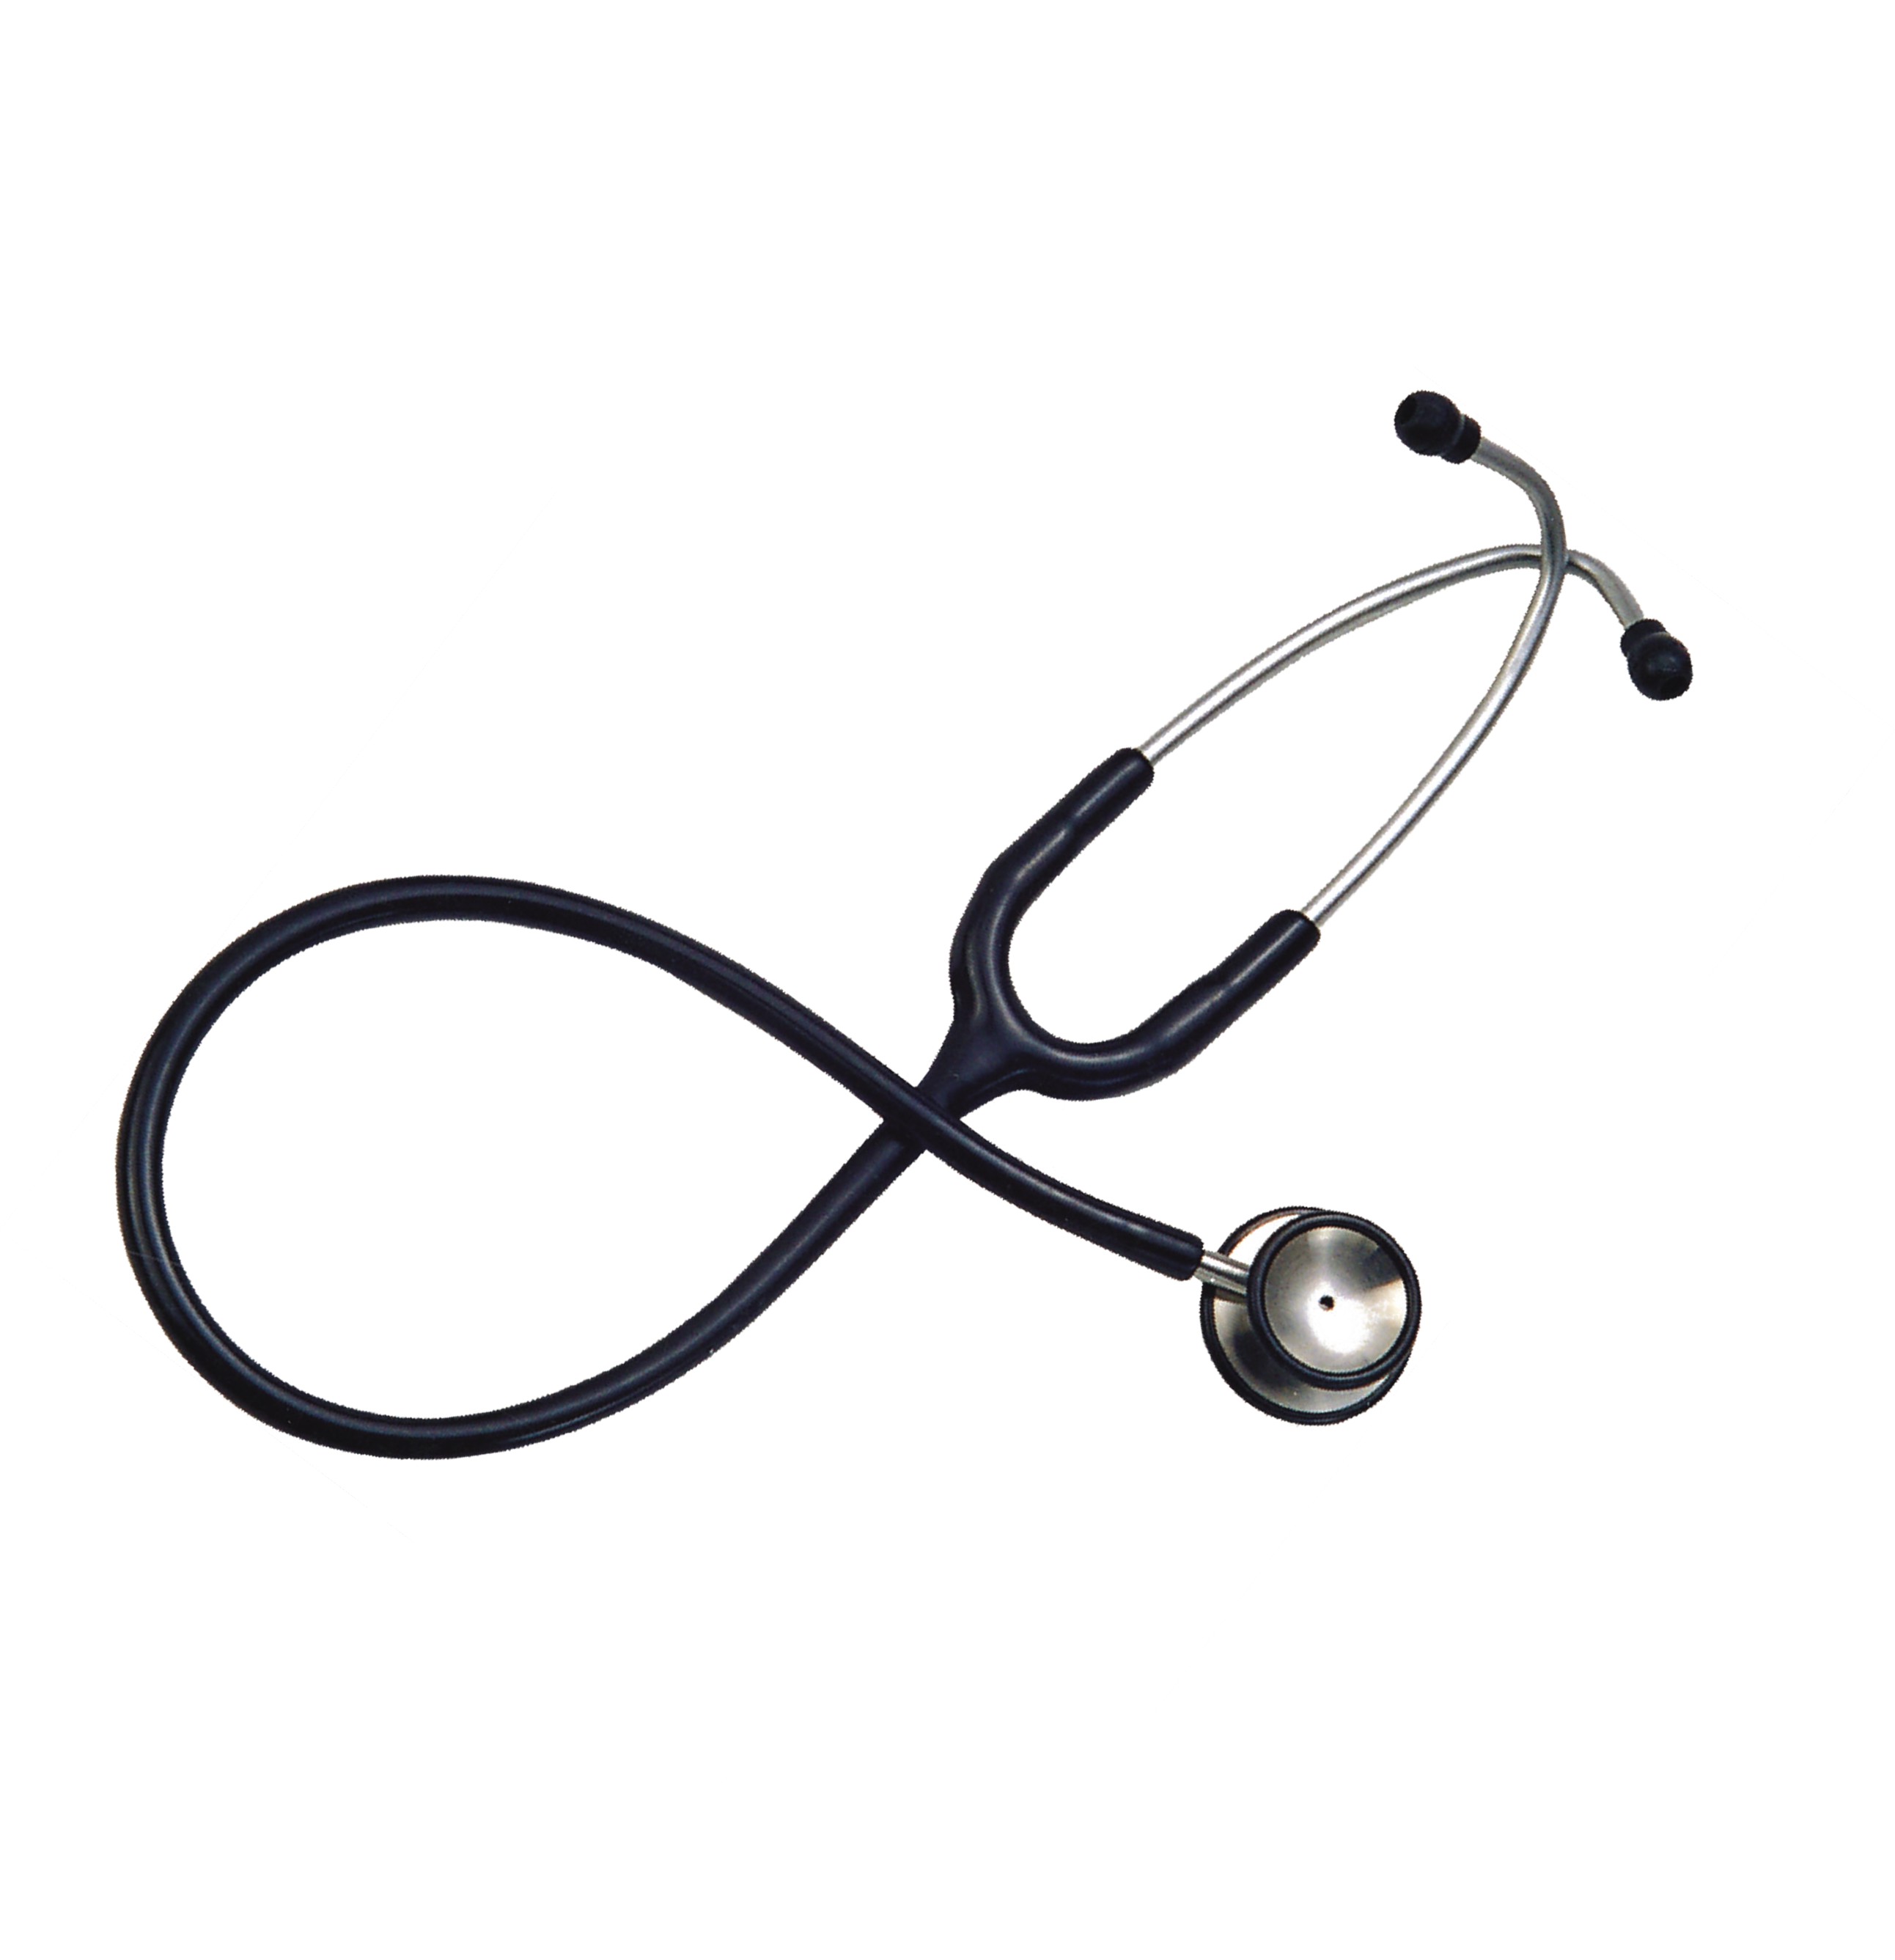 Simple stethoscope clipart the cliparts